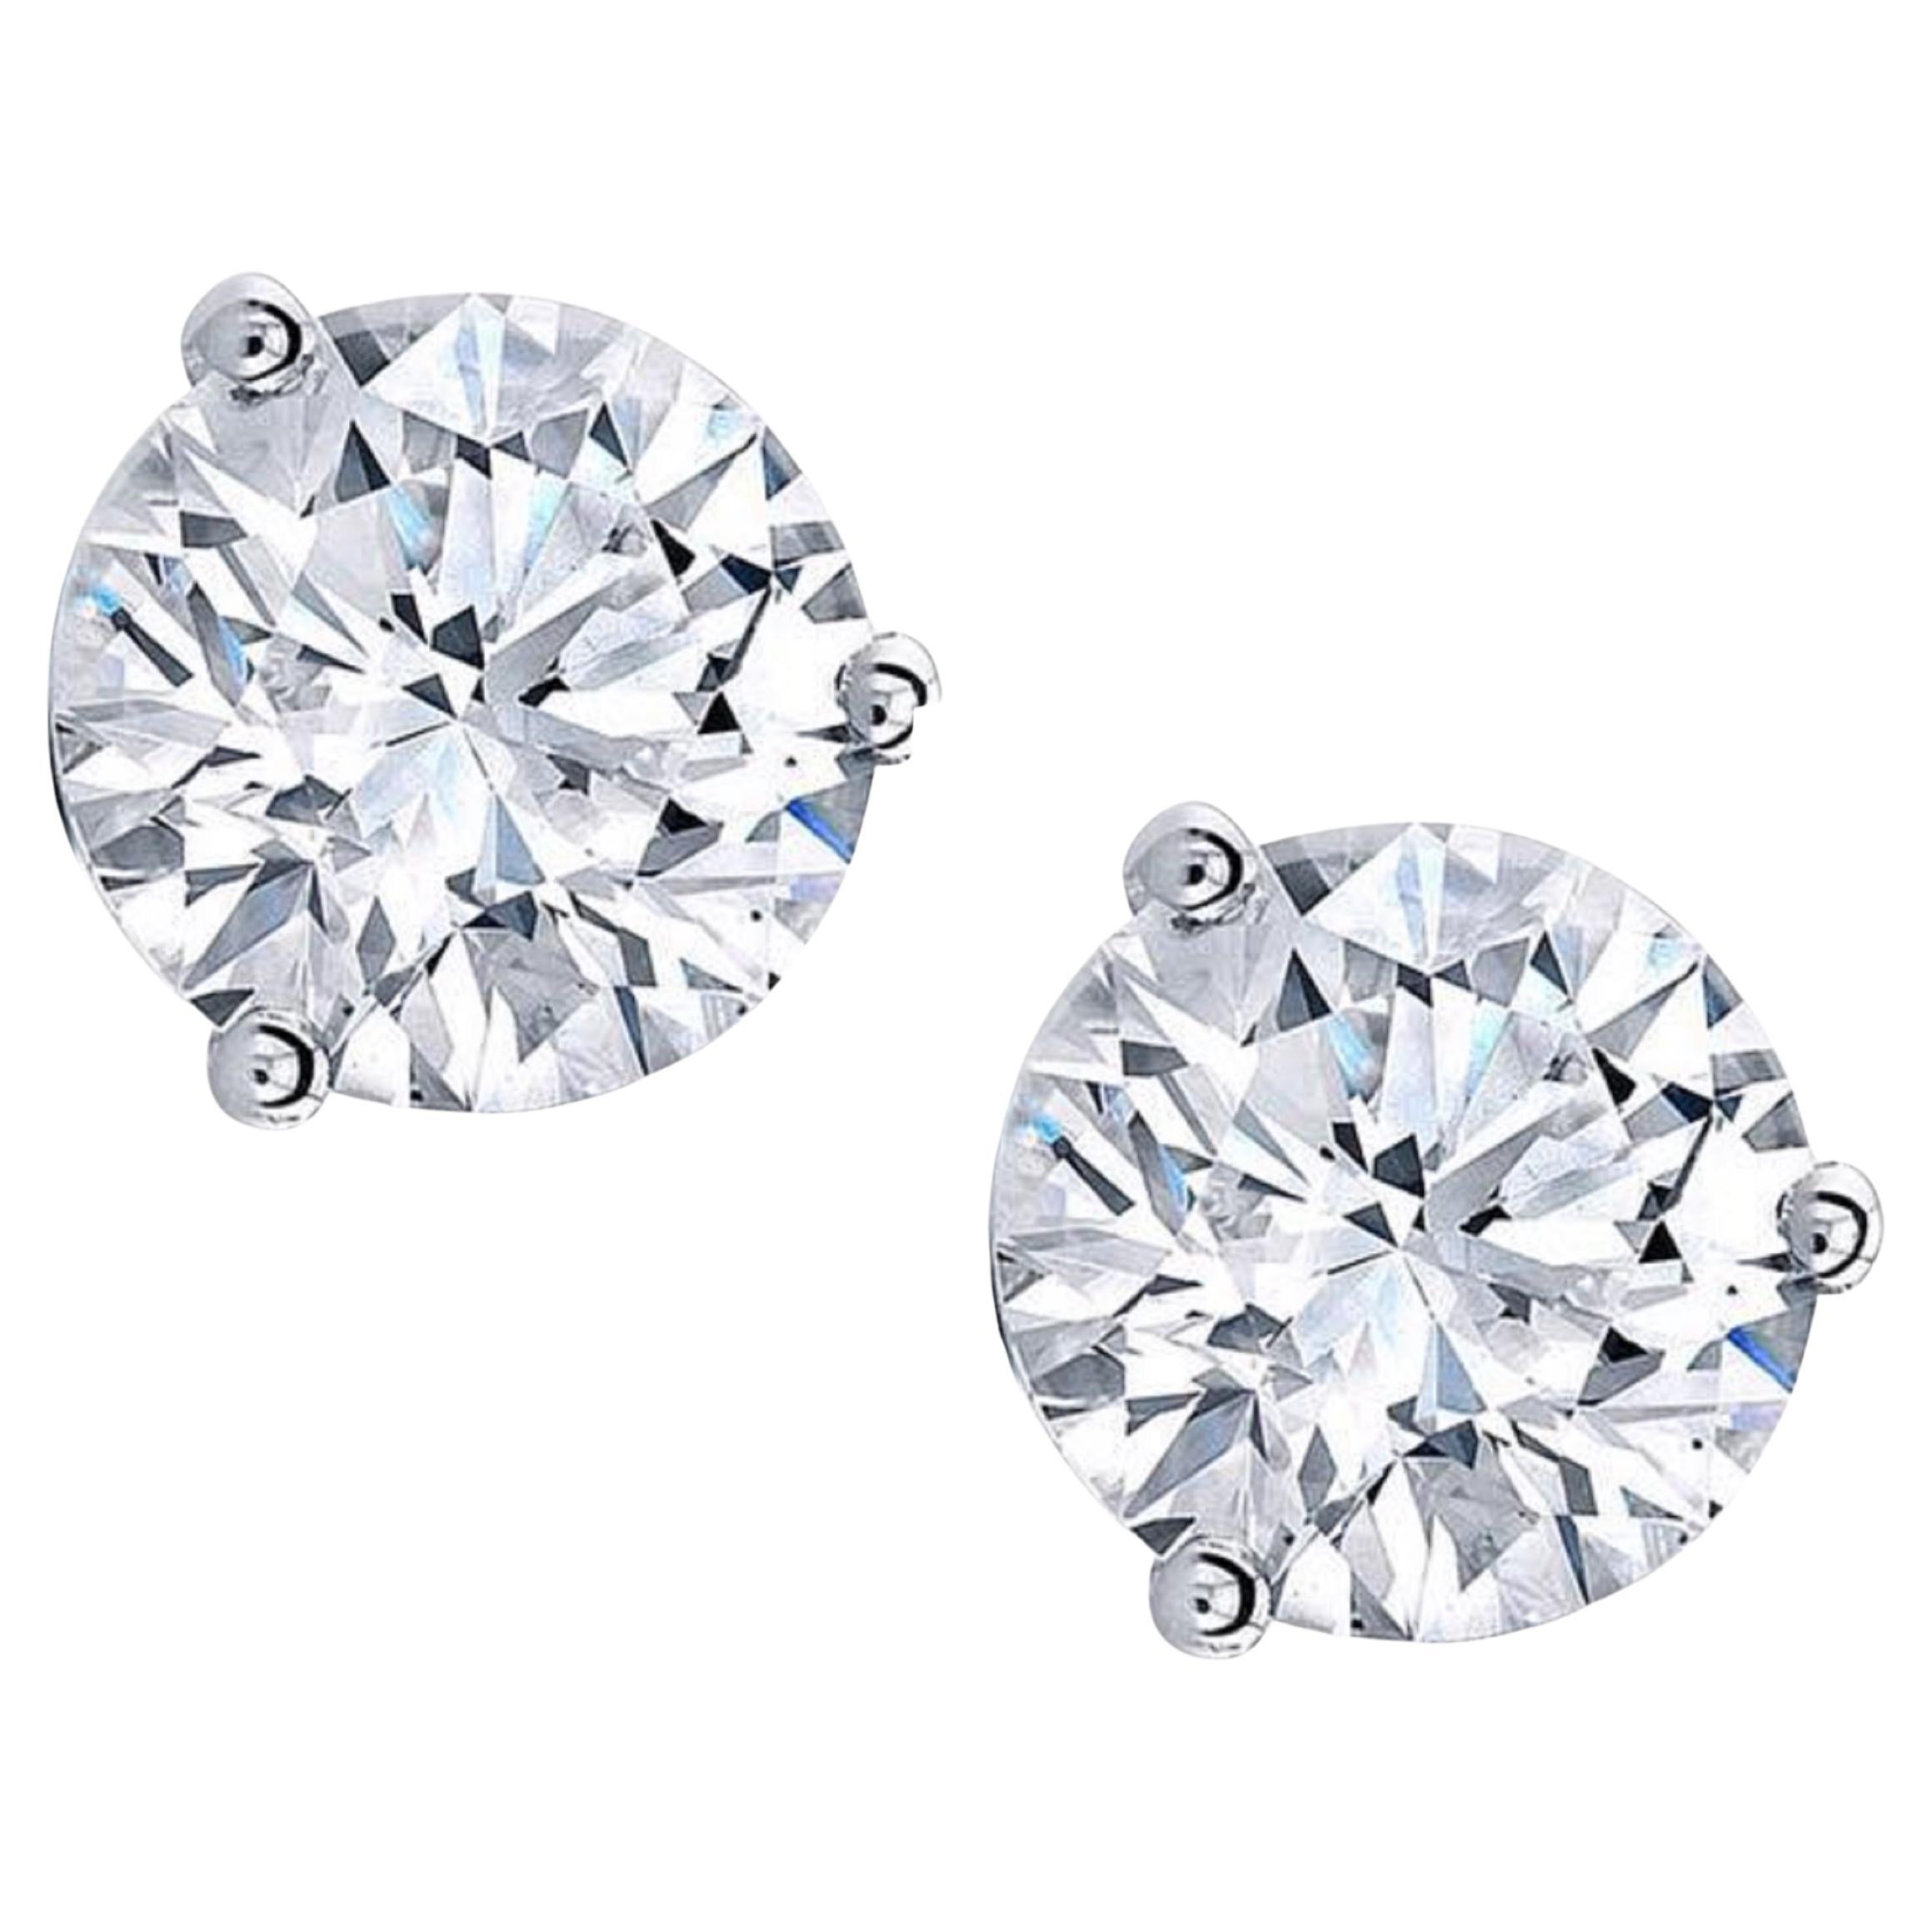 Exceptional GIA Certified D VVS1 Clarity Round Brilliant Cut Diamond Studs For Sale